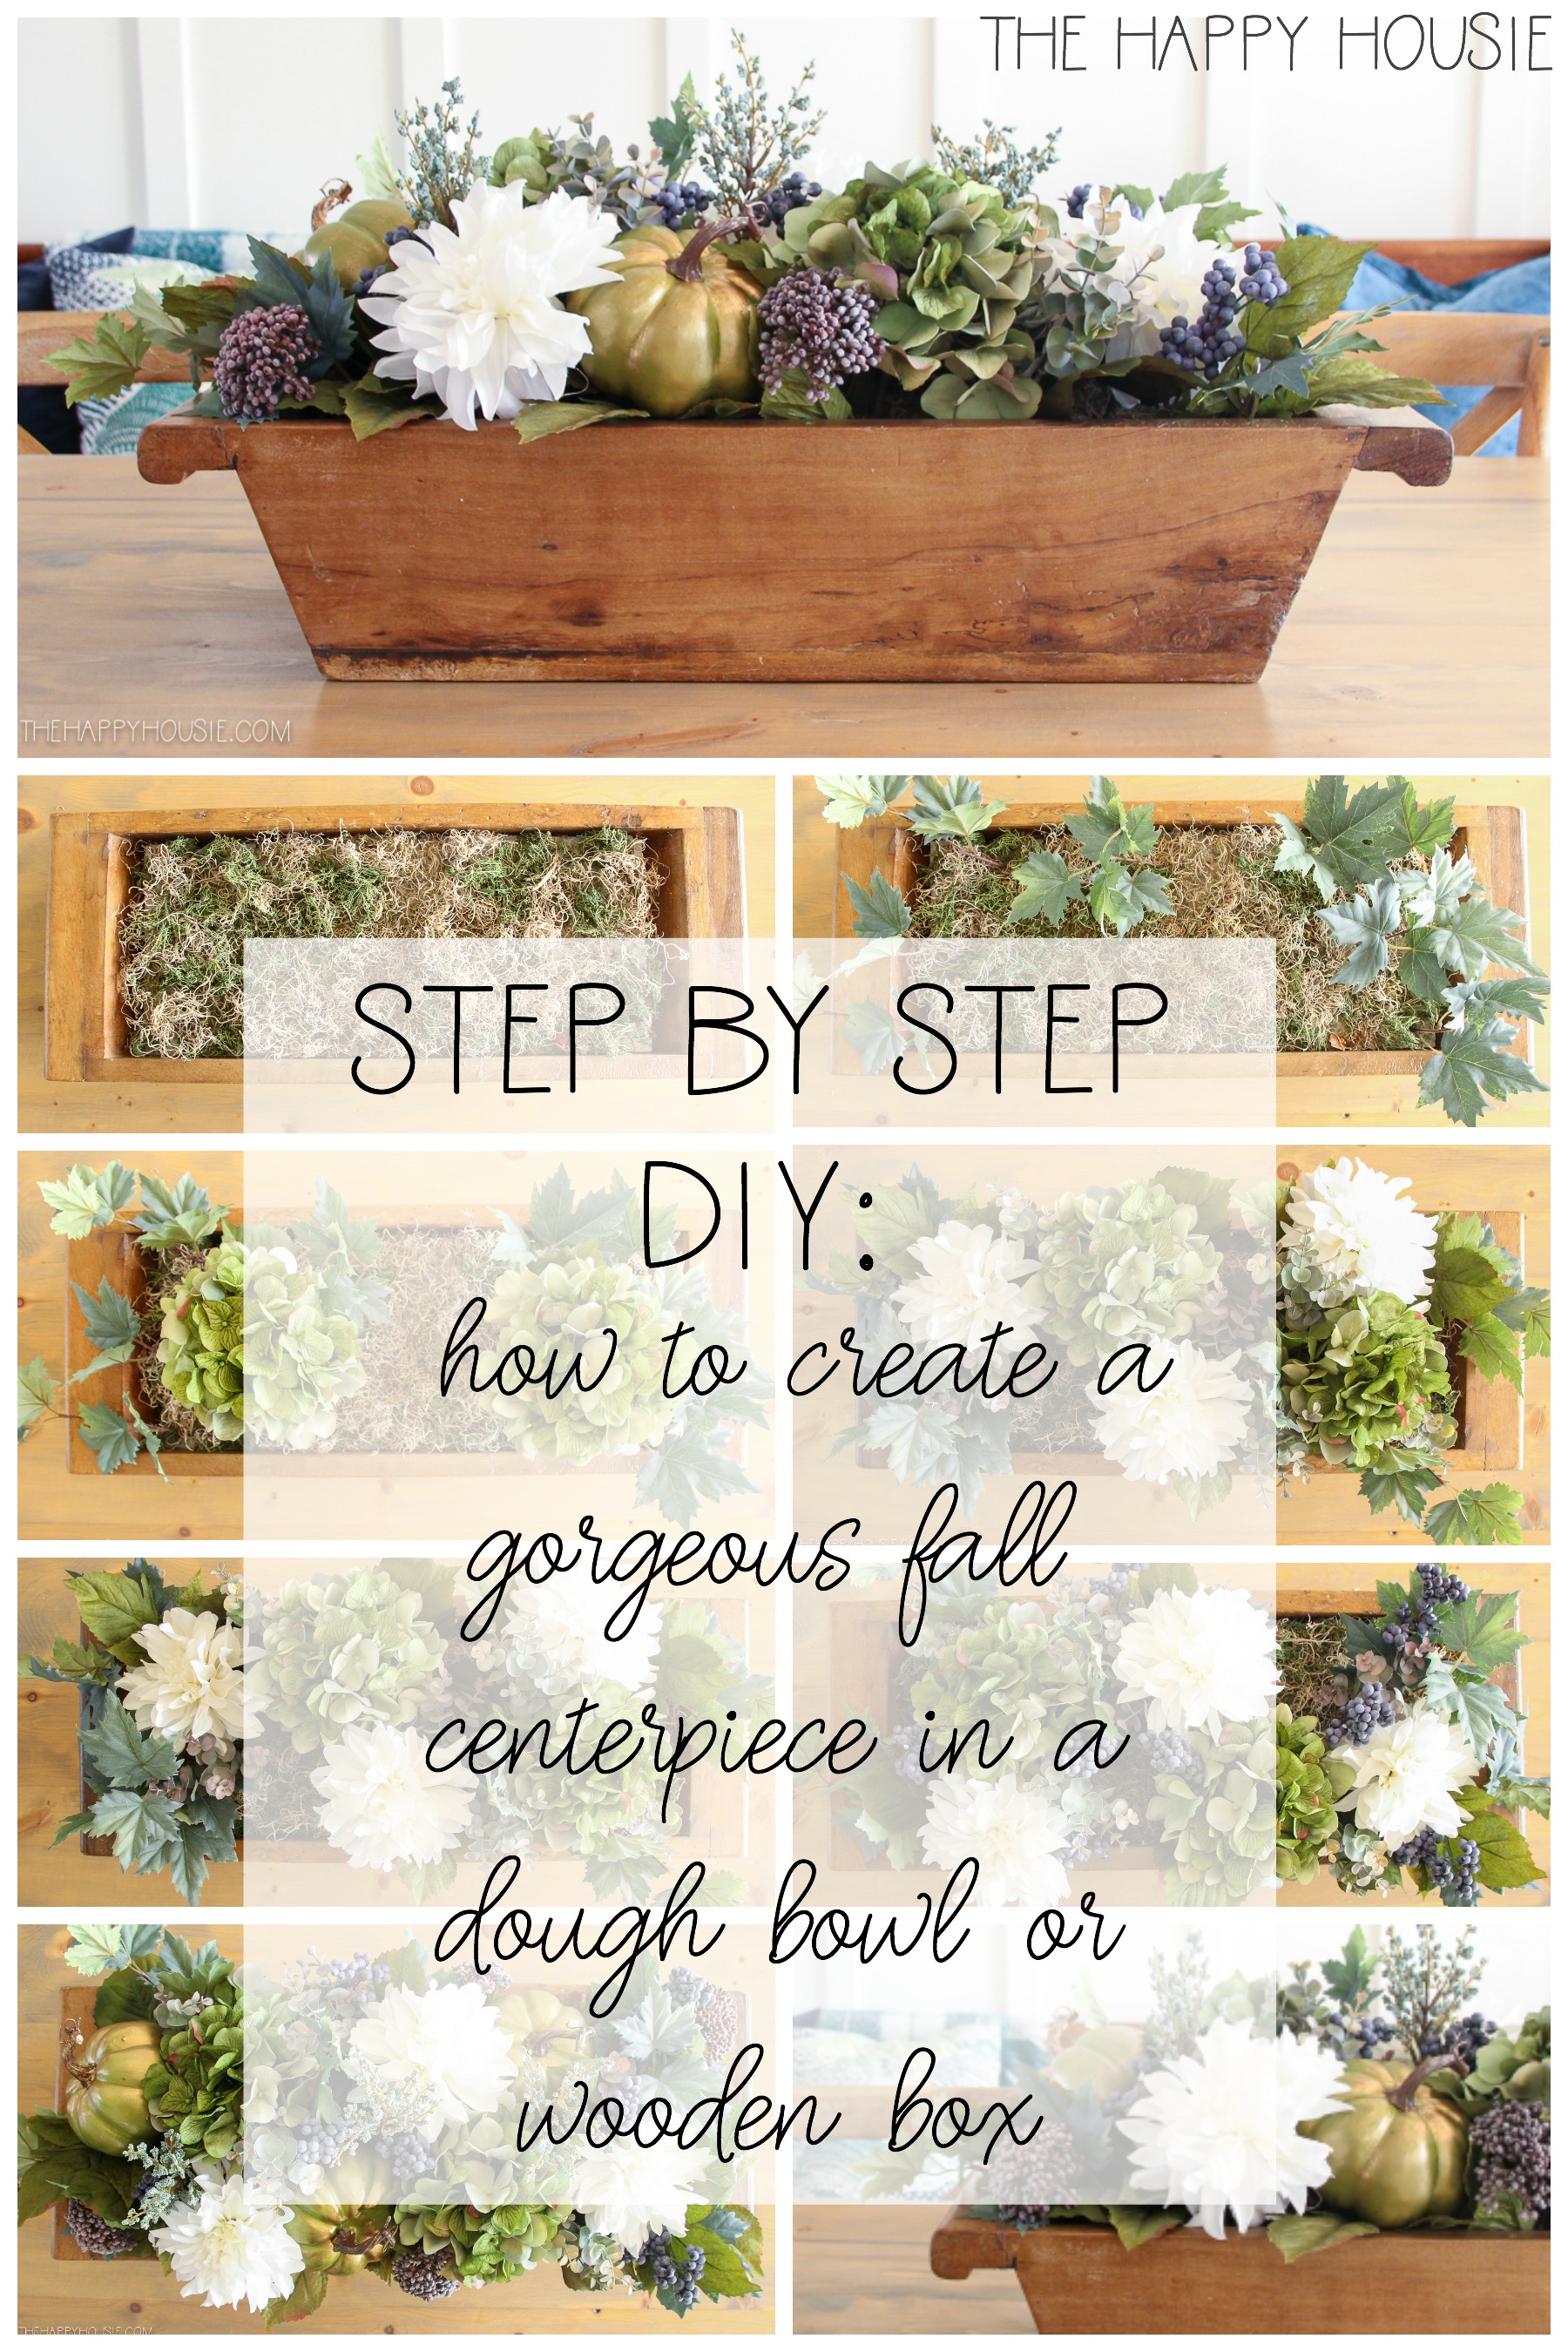 Step by step how to create a dough bowl centerpiece graphic.